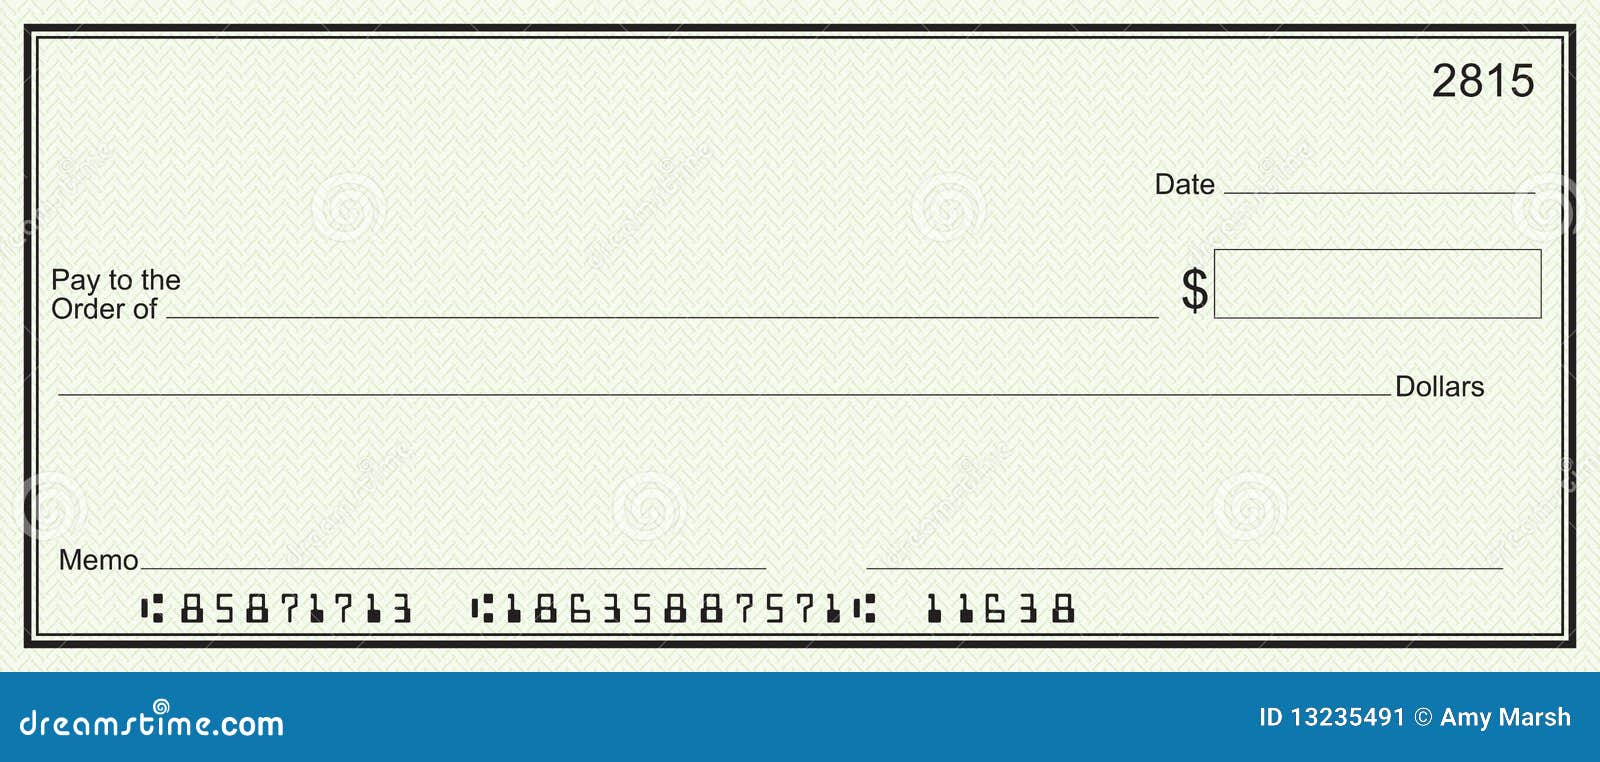 Large Blank Check - Green Security Background Stock Image - Image: 13235491